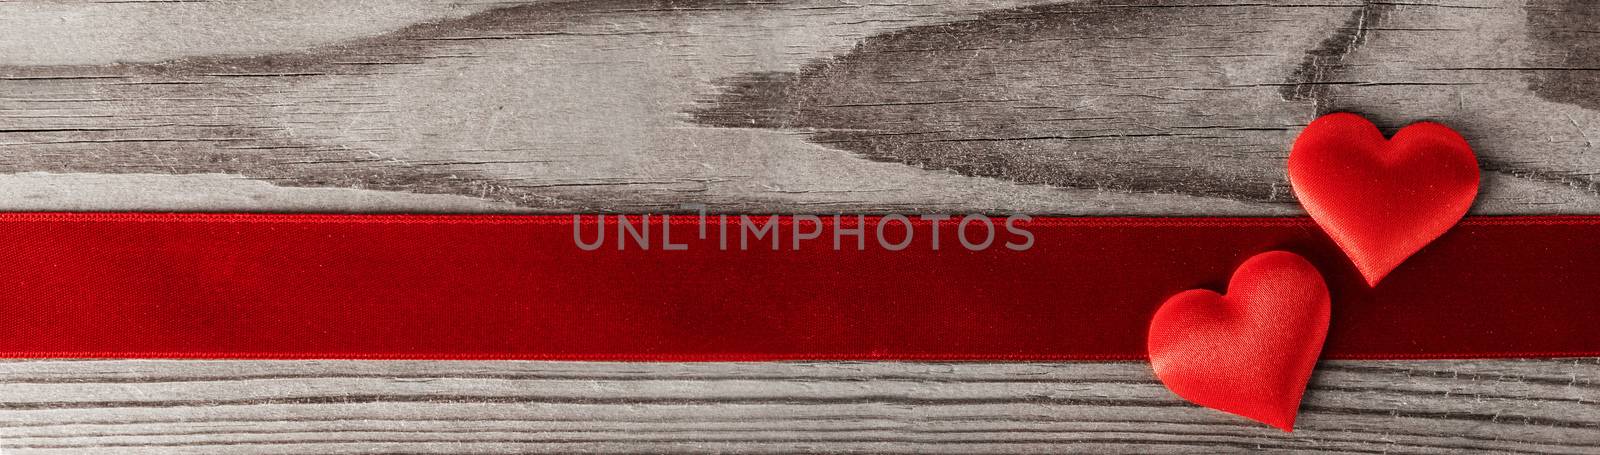 Valentine's day two red silk hearts and ribbon stripe on wooden background, love concept